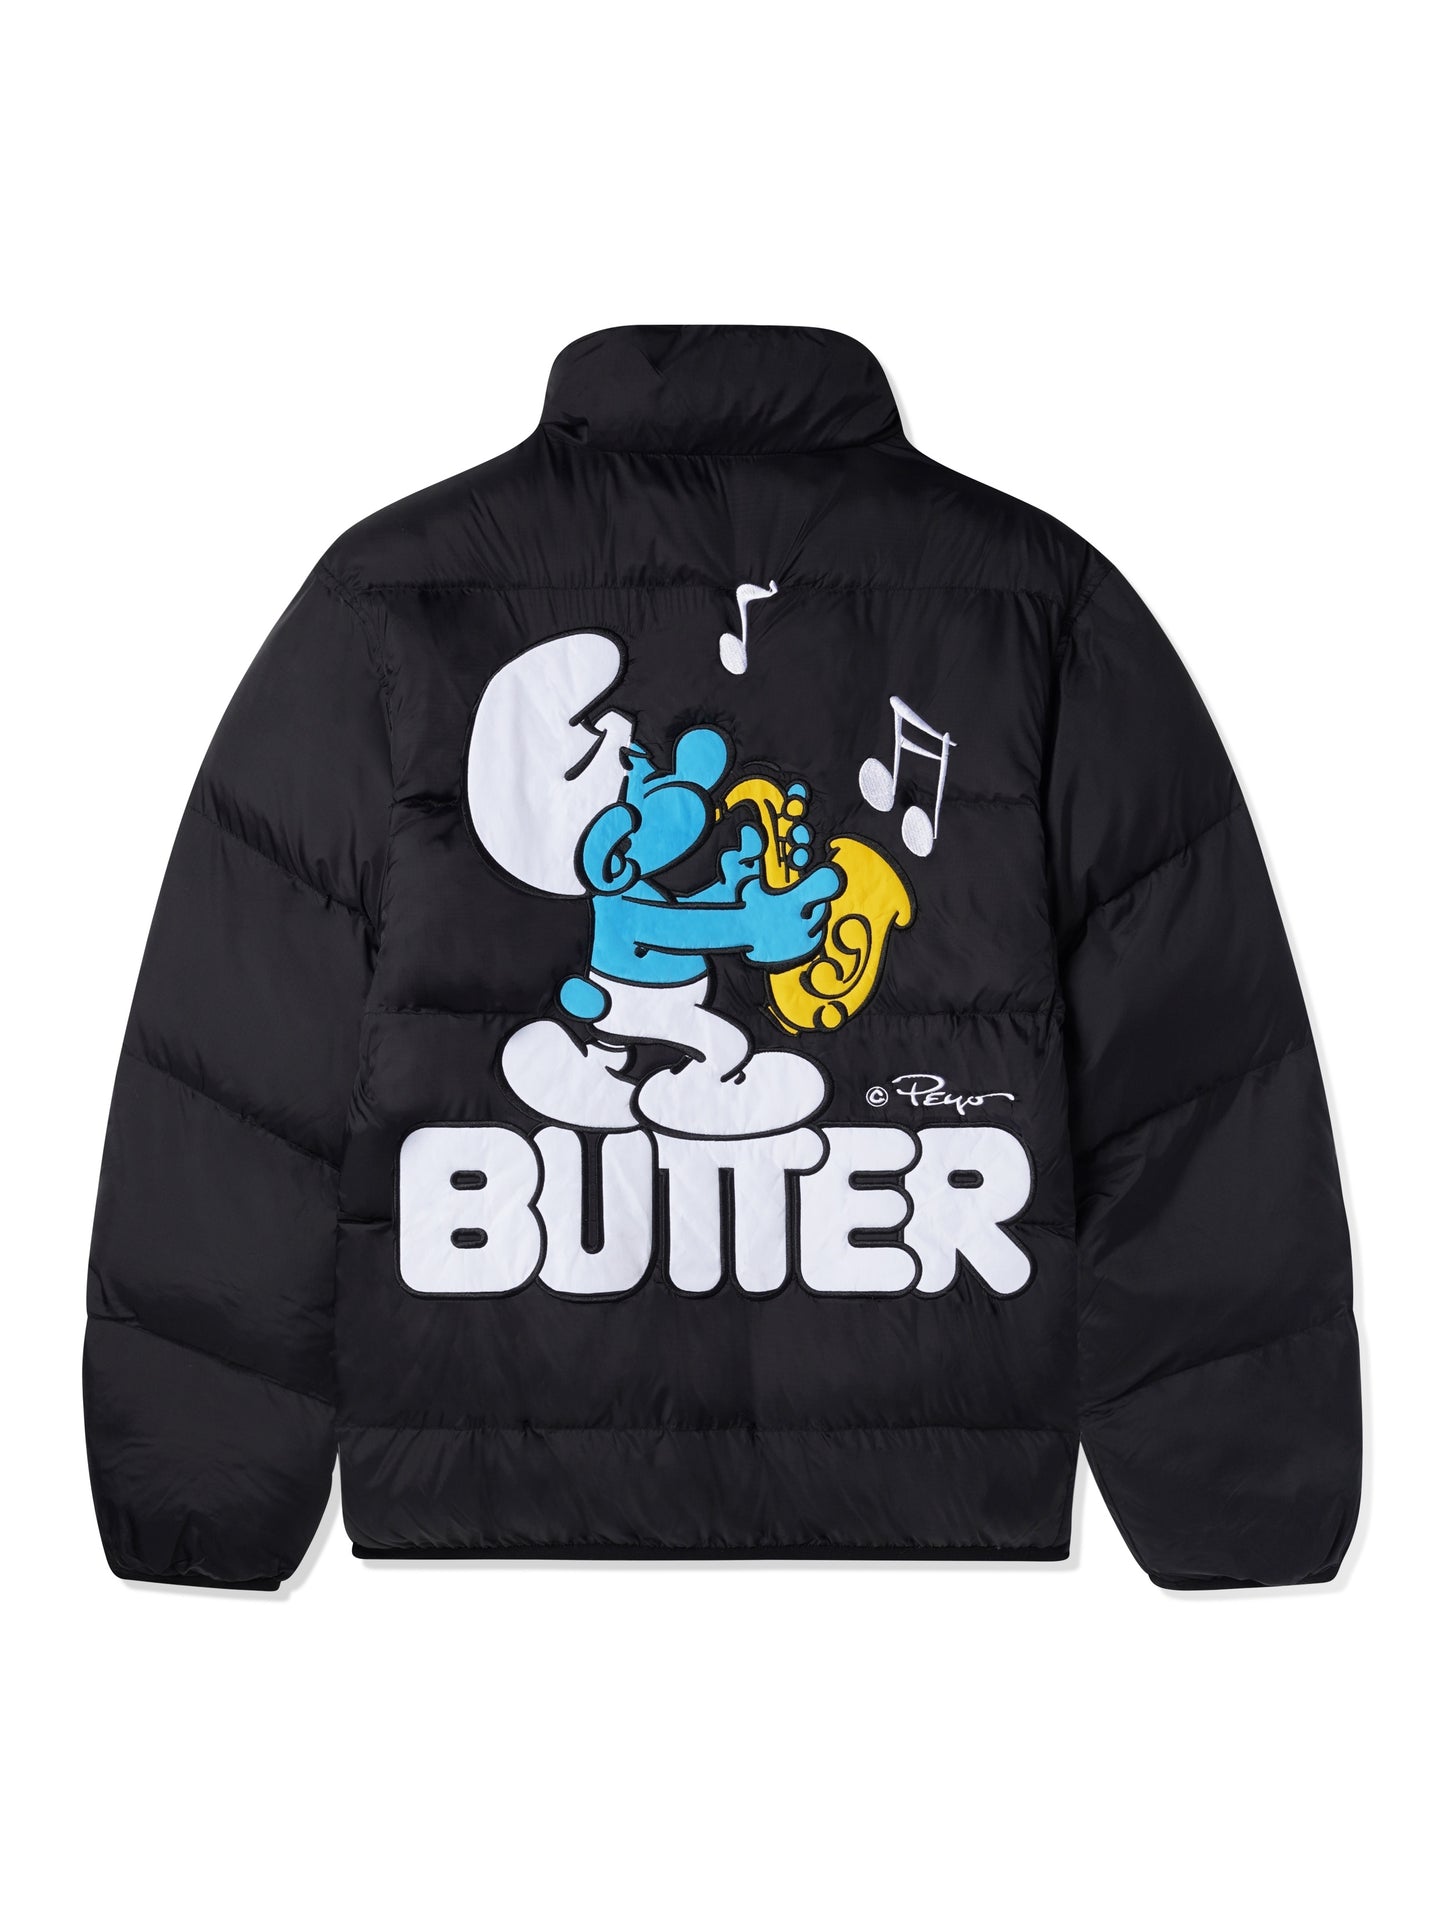 BUTTER GOODS x The Smurfs Harmony Puffer Jacket - Black